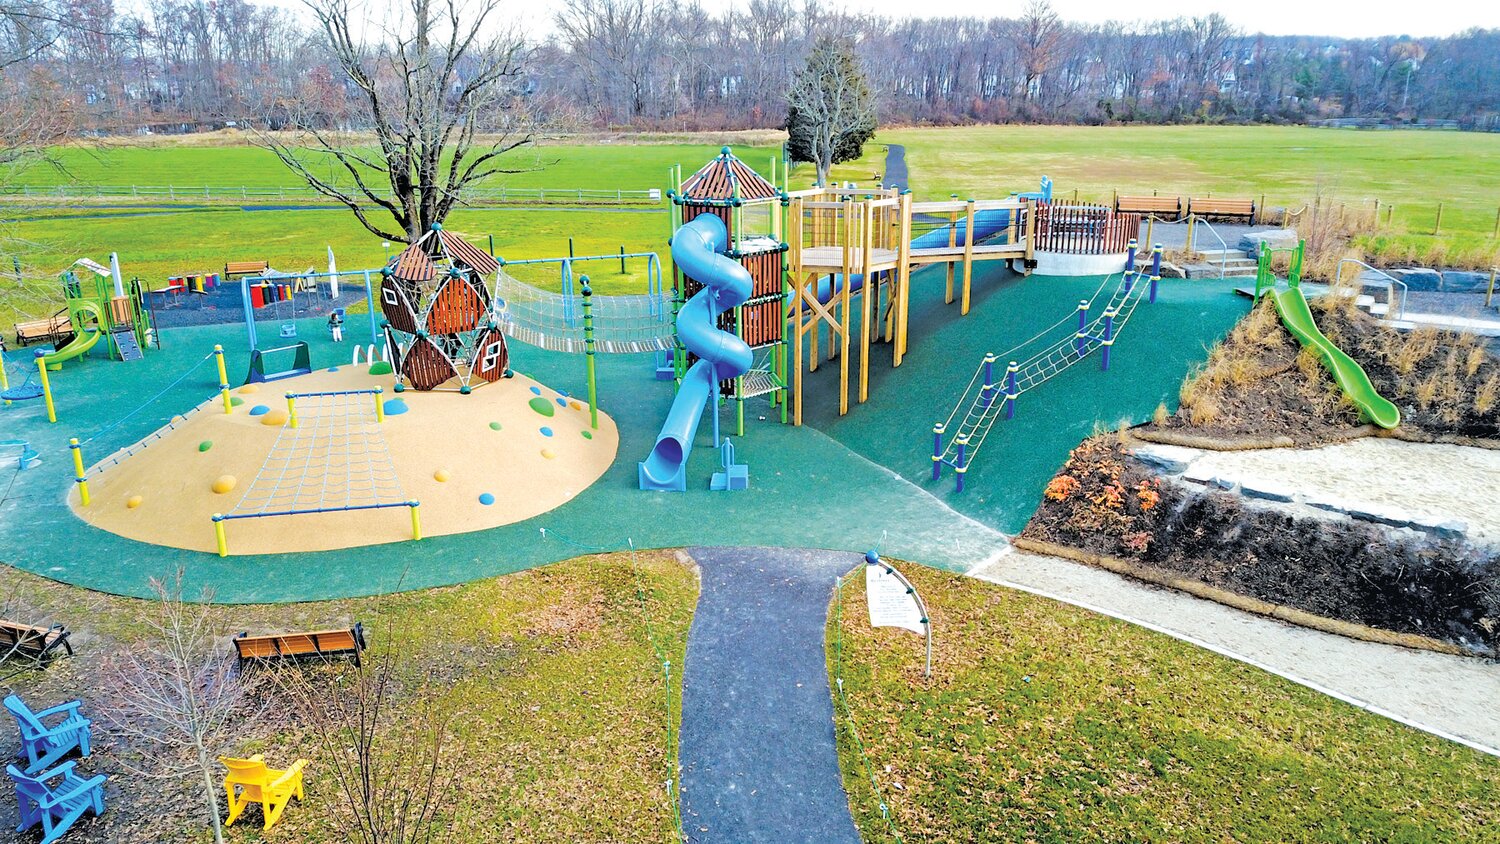 The inclusive Lions Pride Park, a 17-acre, Americans with Disabilities Act-compliant park in Warrington, is the result of a partnership between the township and its Lions Club.